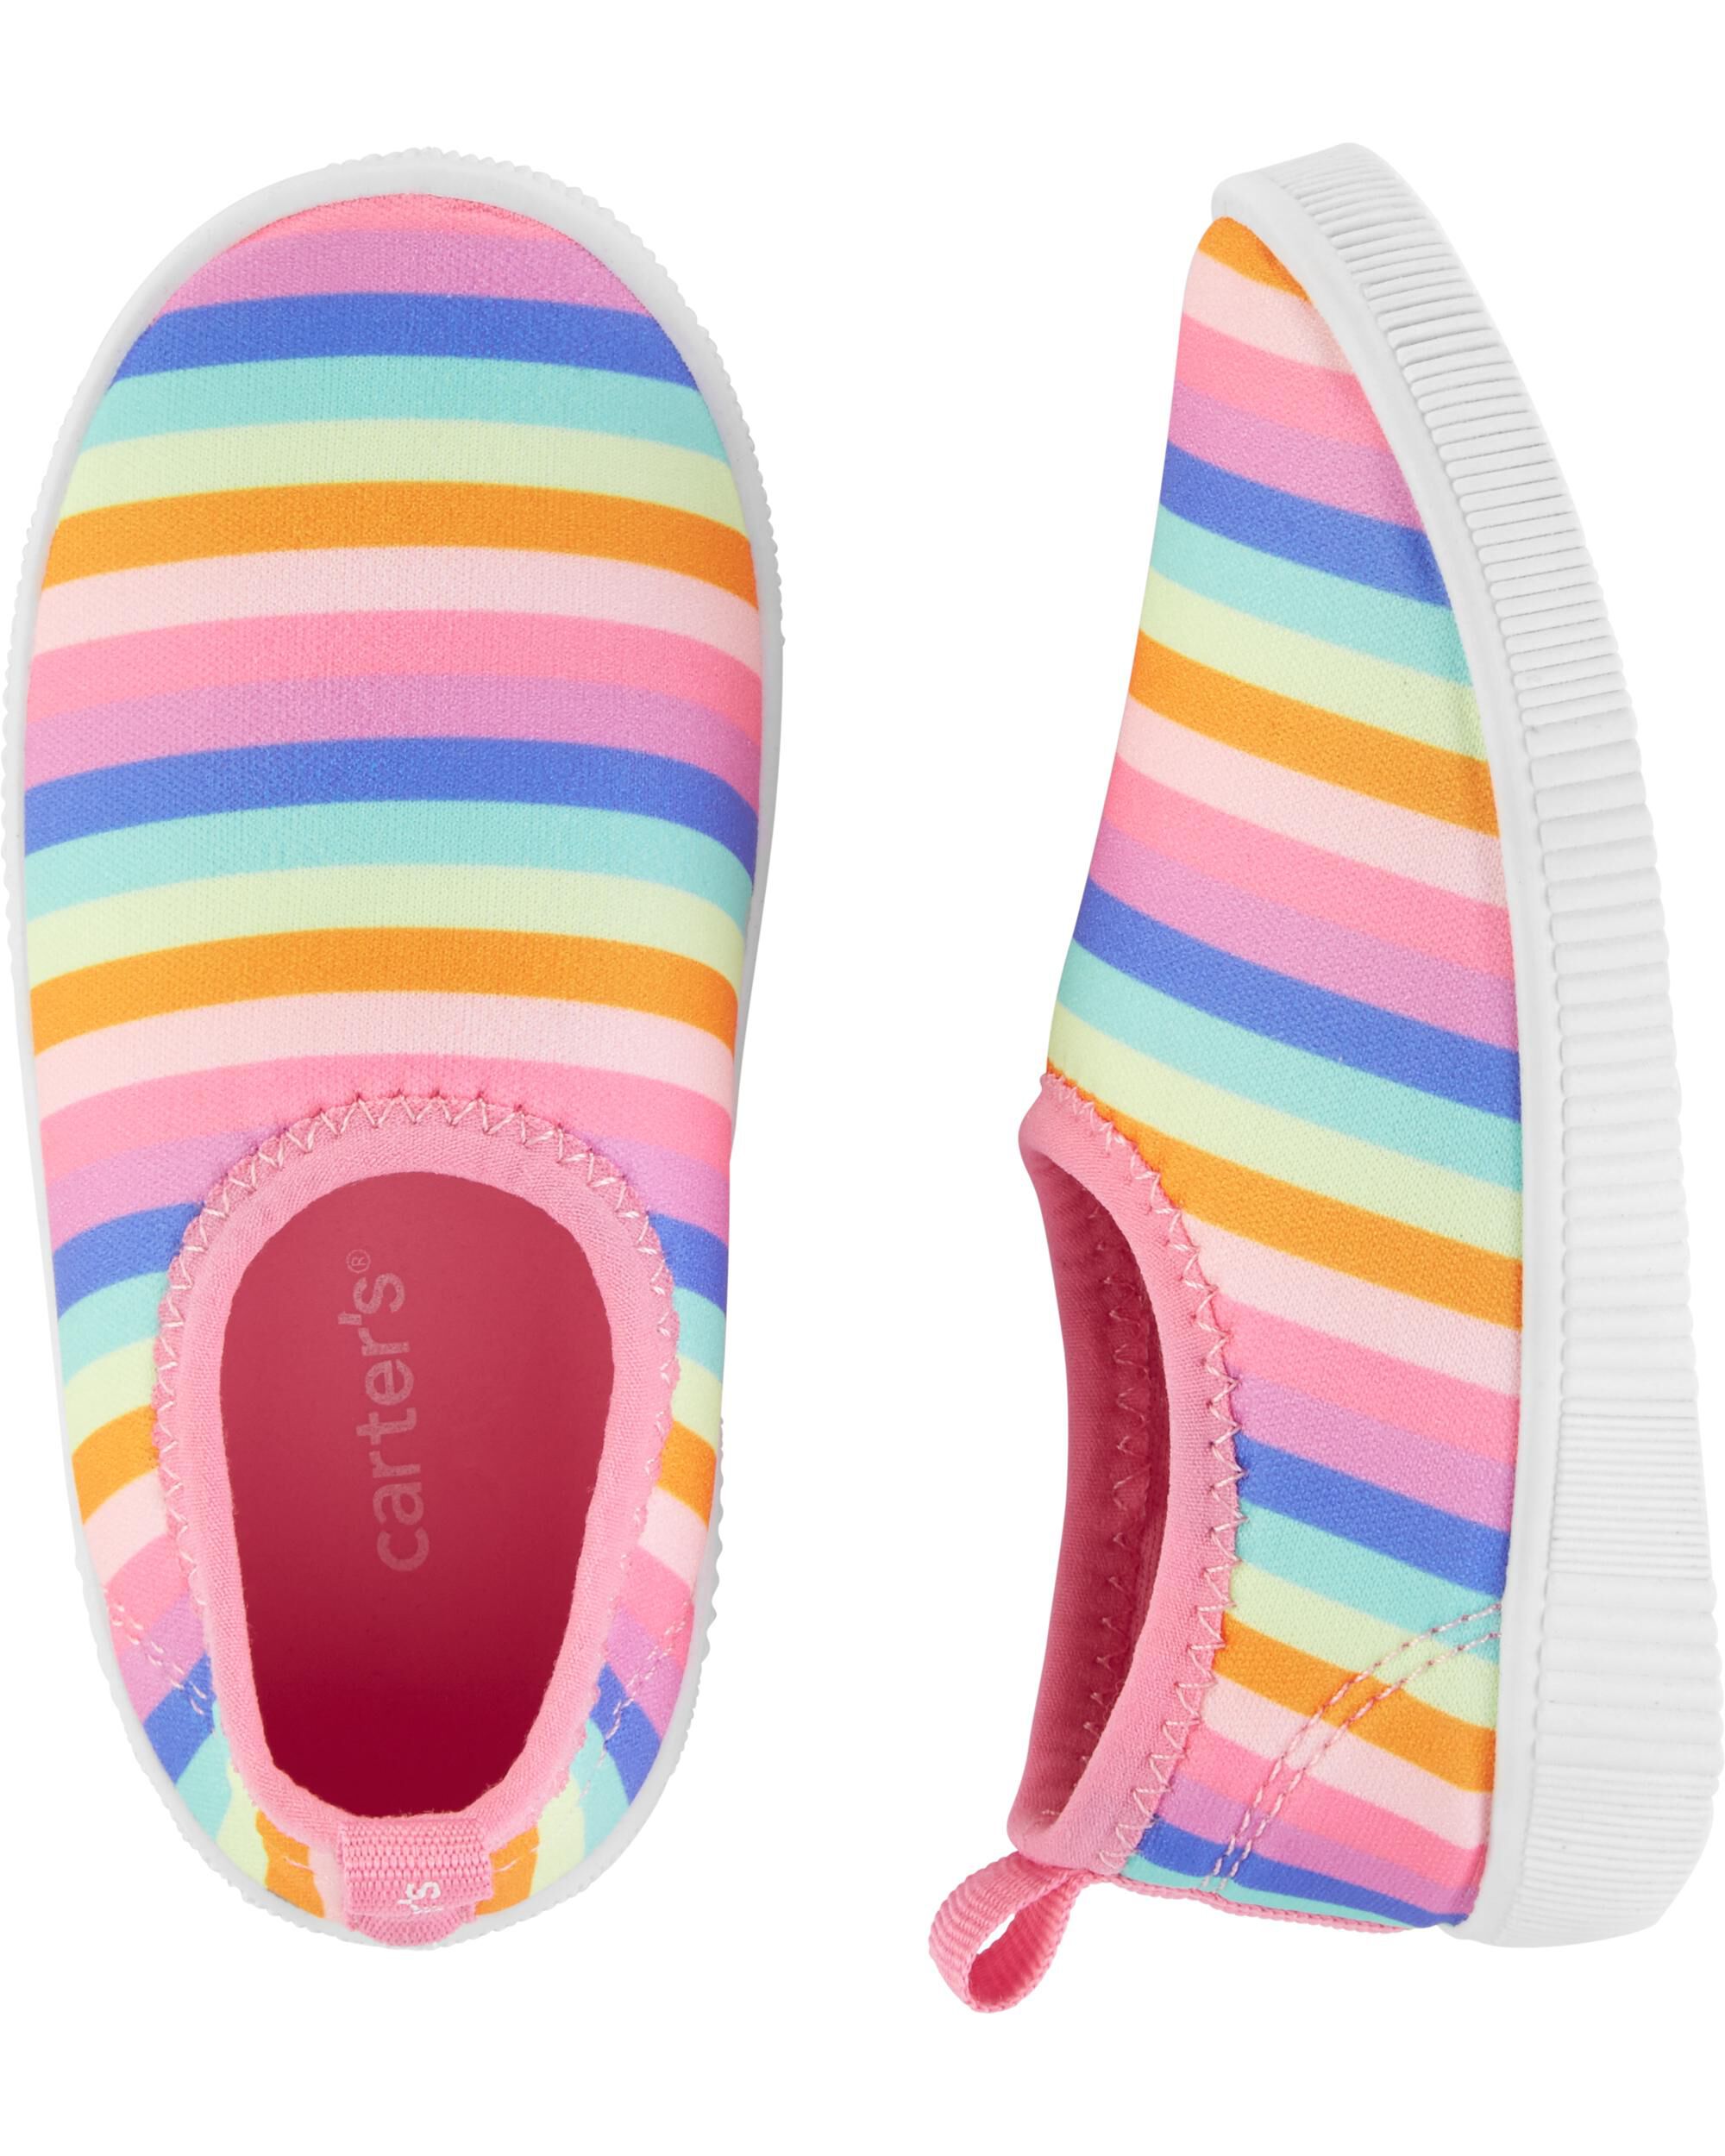 Carter's Rainbow Water Shoes | carters.com